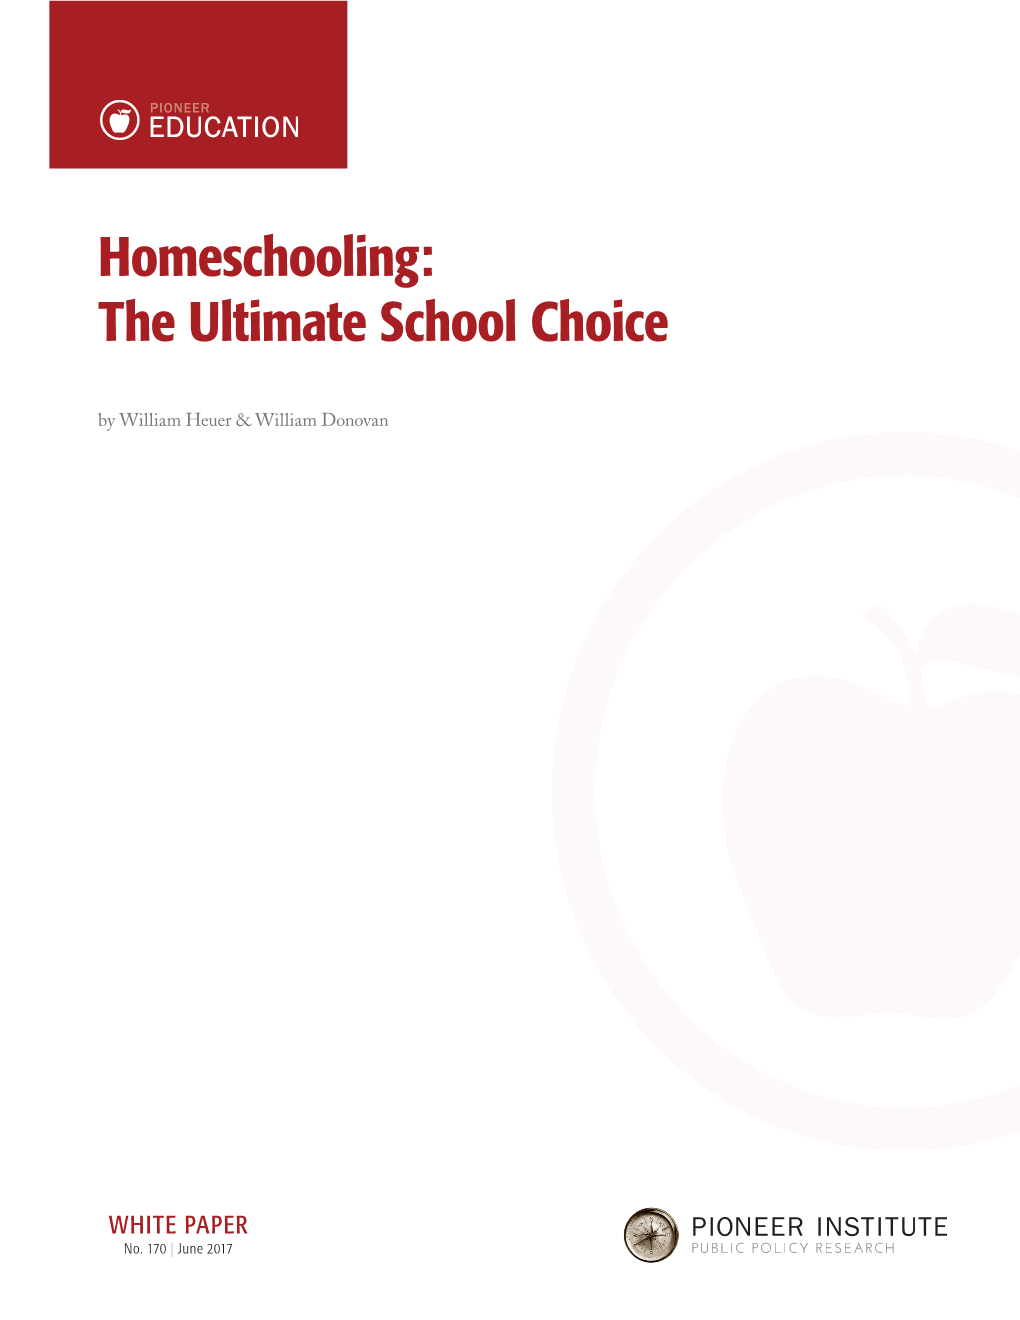 Homeschooling: the Ultimate School Choice